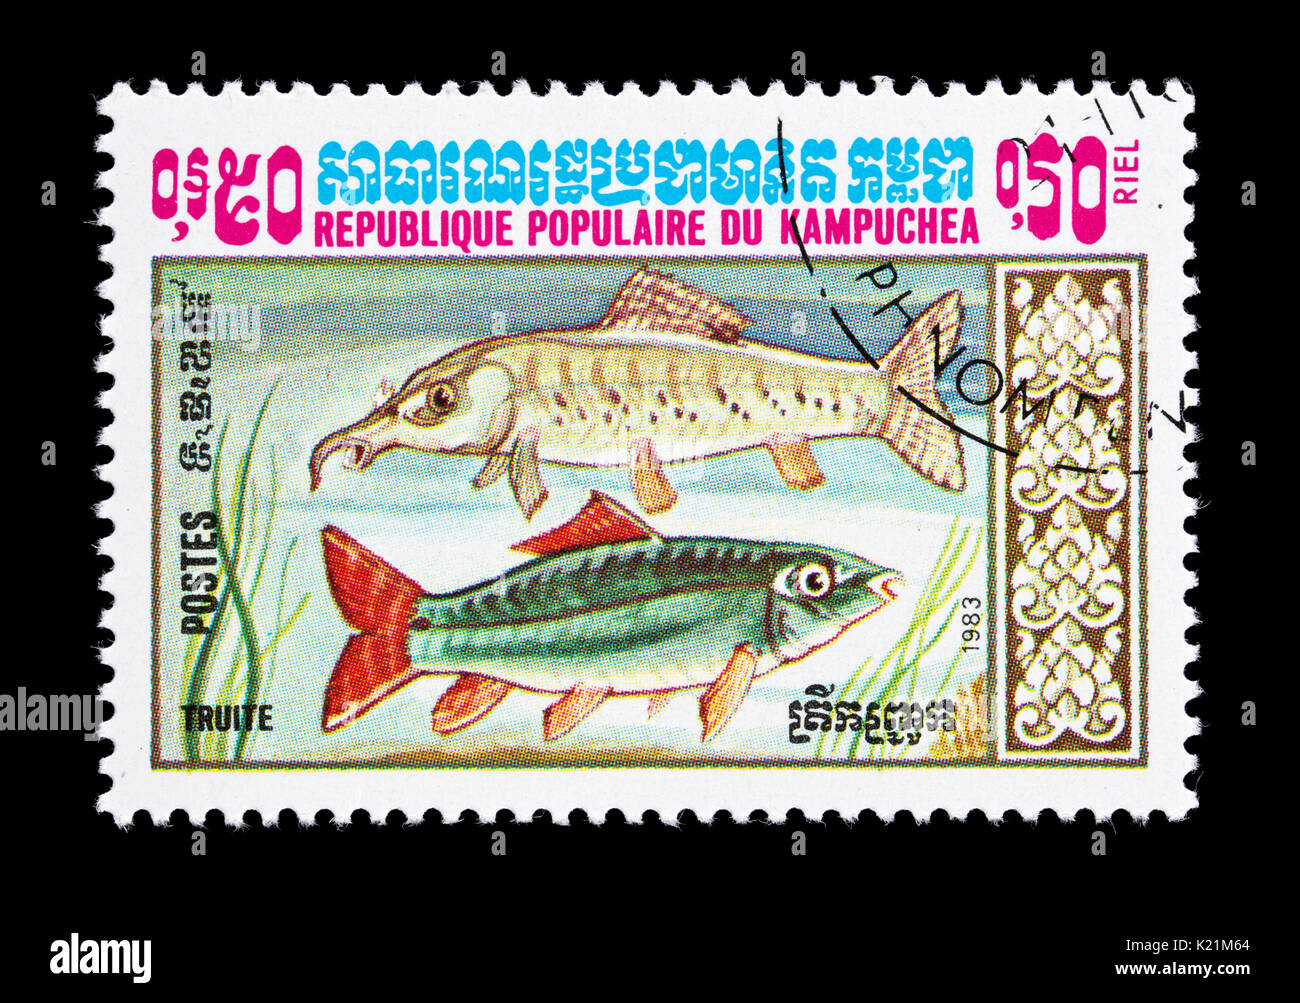 Postage stamp from Cambodia (Kampuchea) depicting a trout fish species. Stock Photo